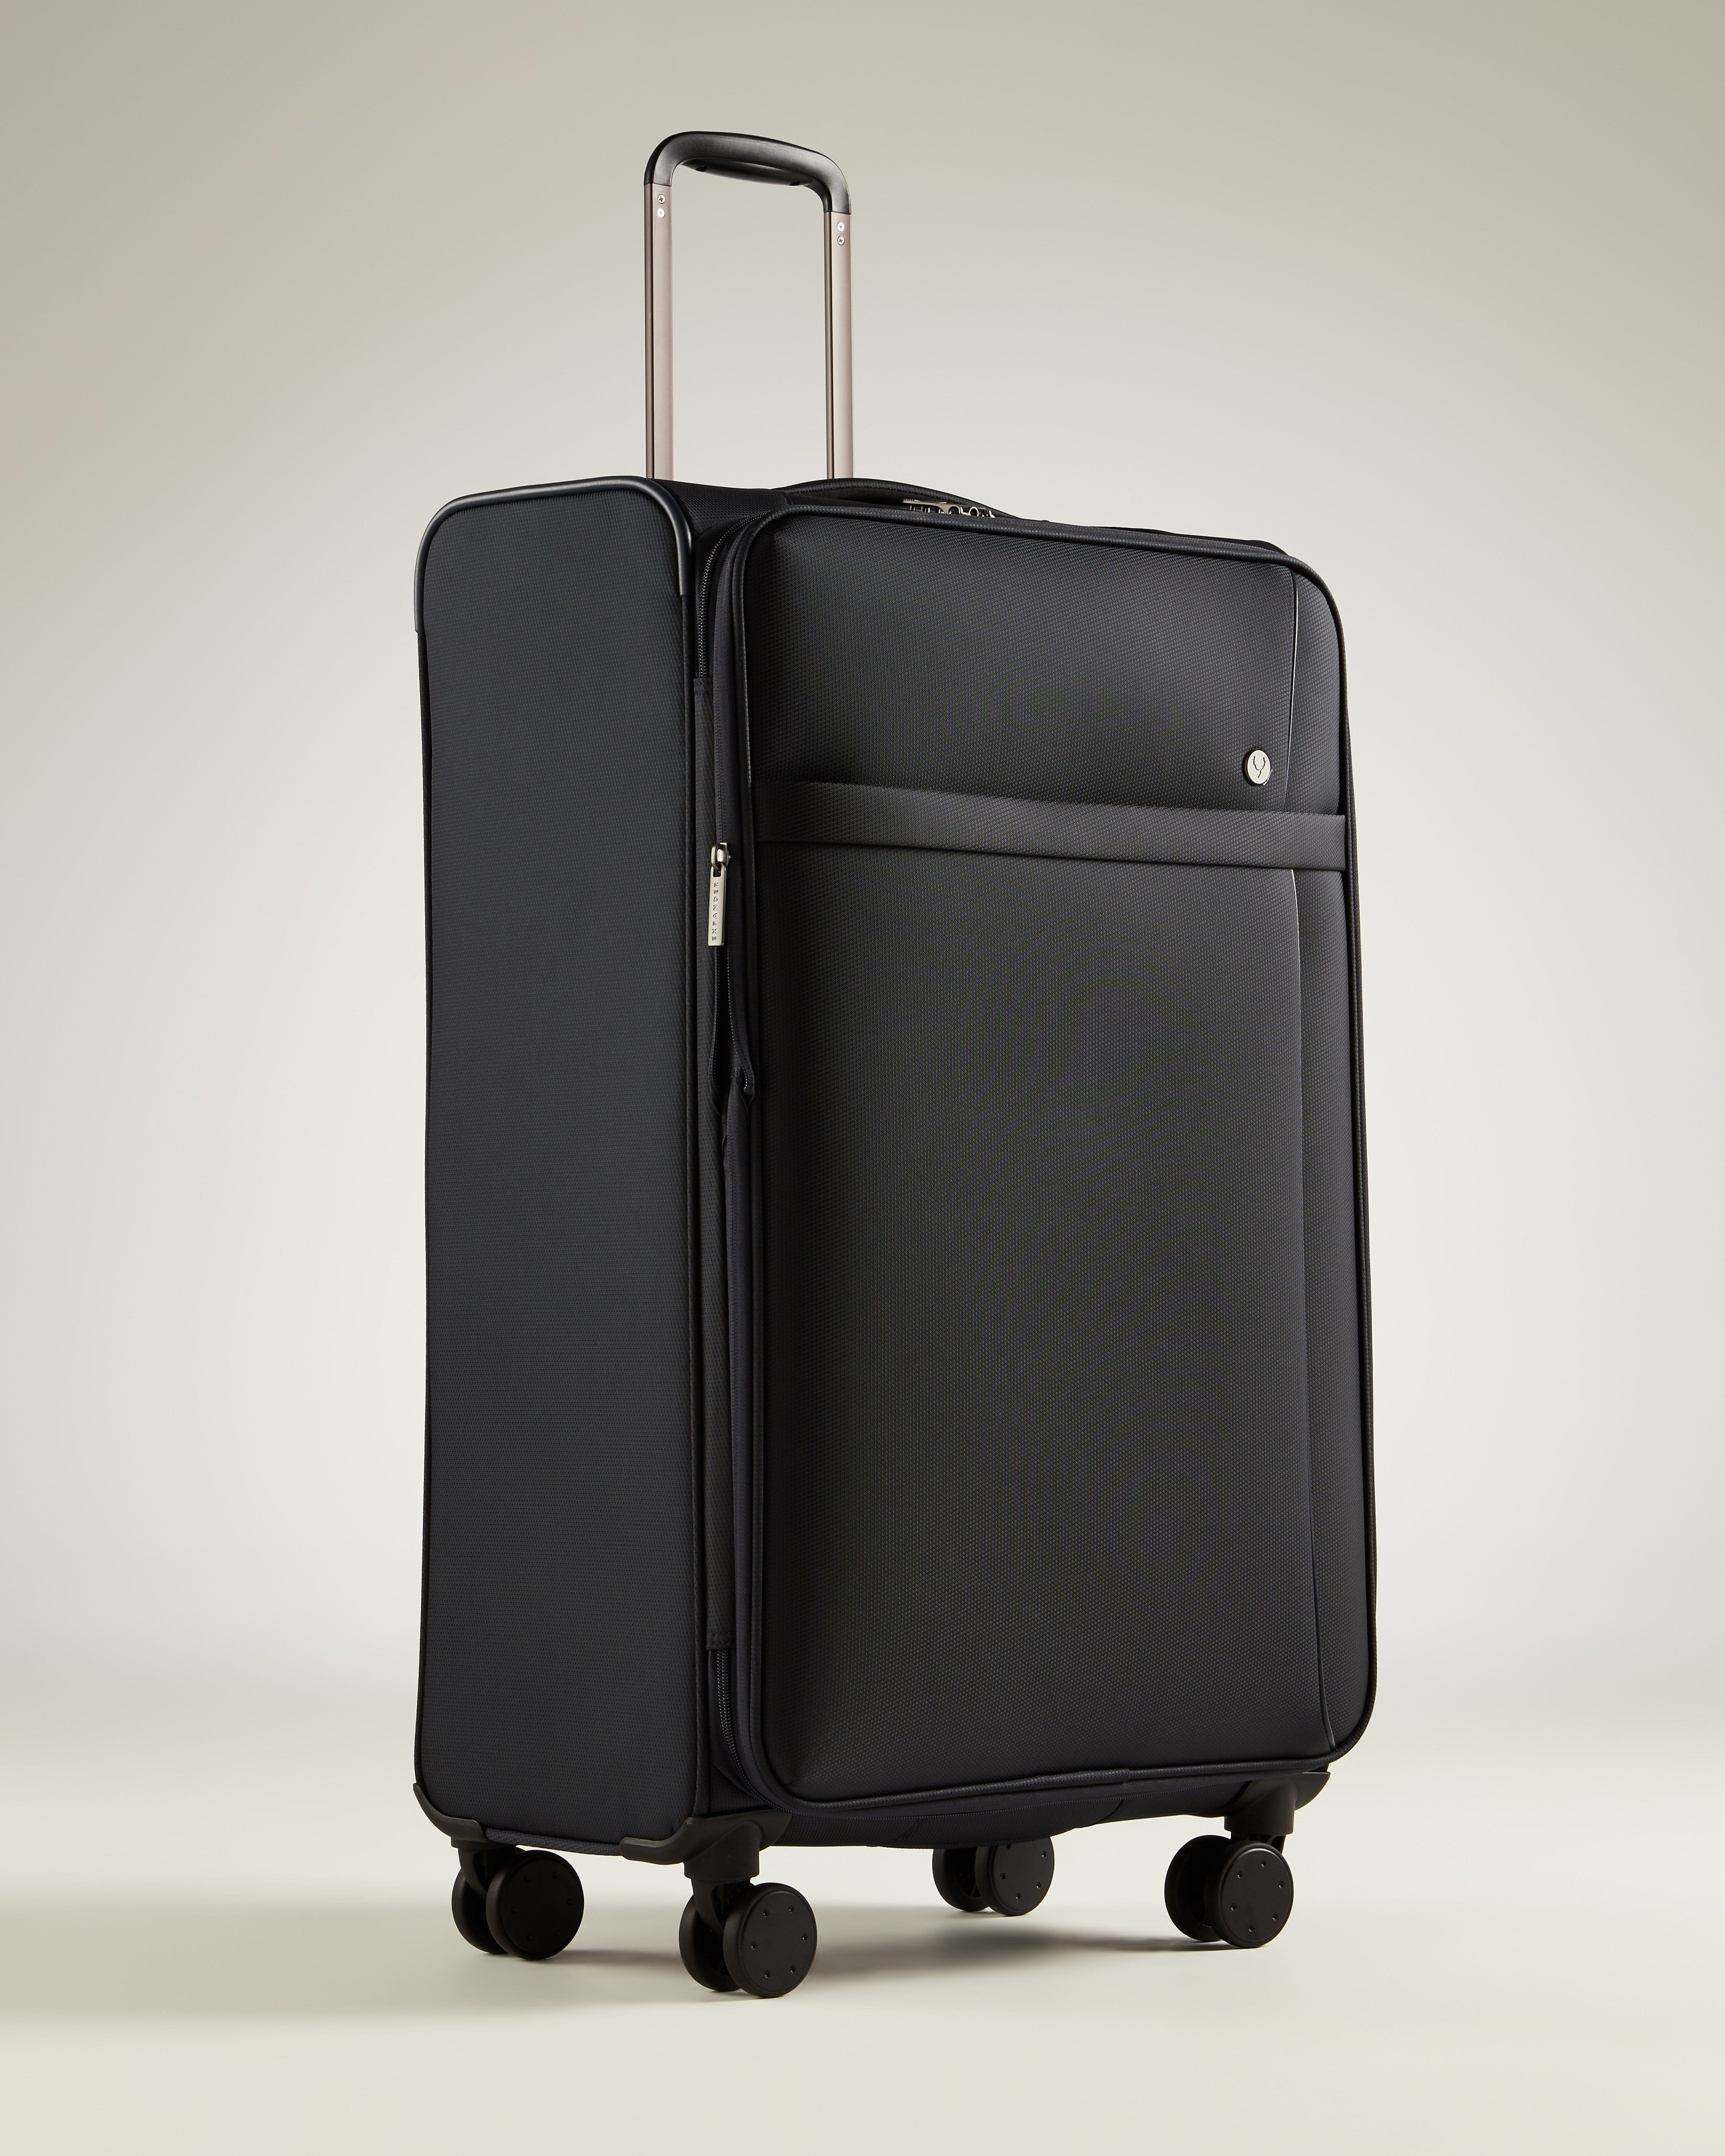 View Antler Prestwick Large Suitcase In Navy Size 83 x 465 x 31 cm information